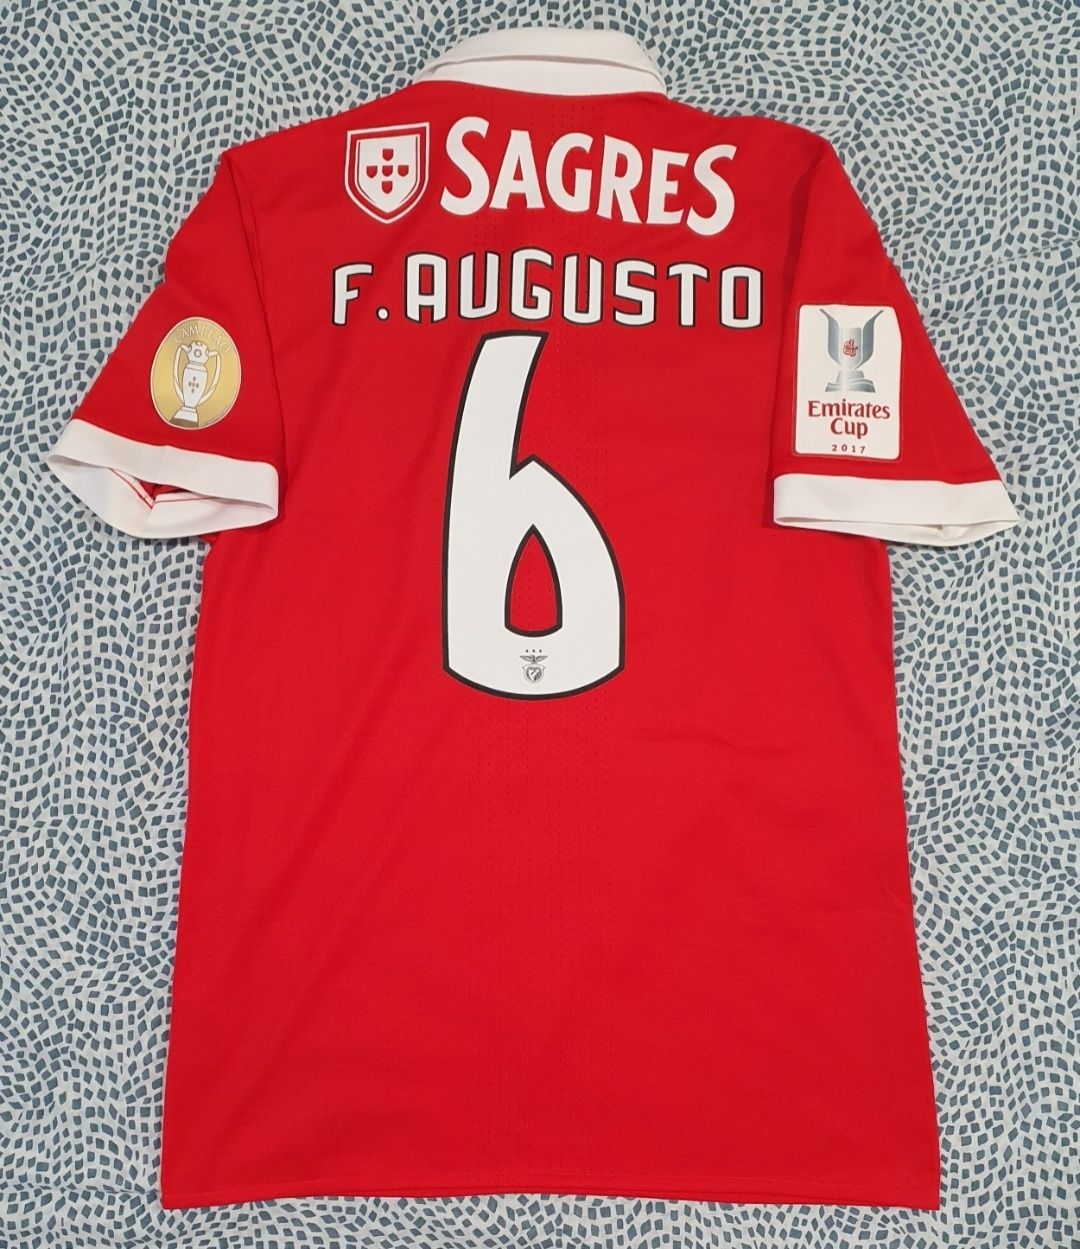 Camisola Benfica Emirates cup